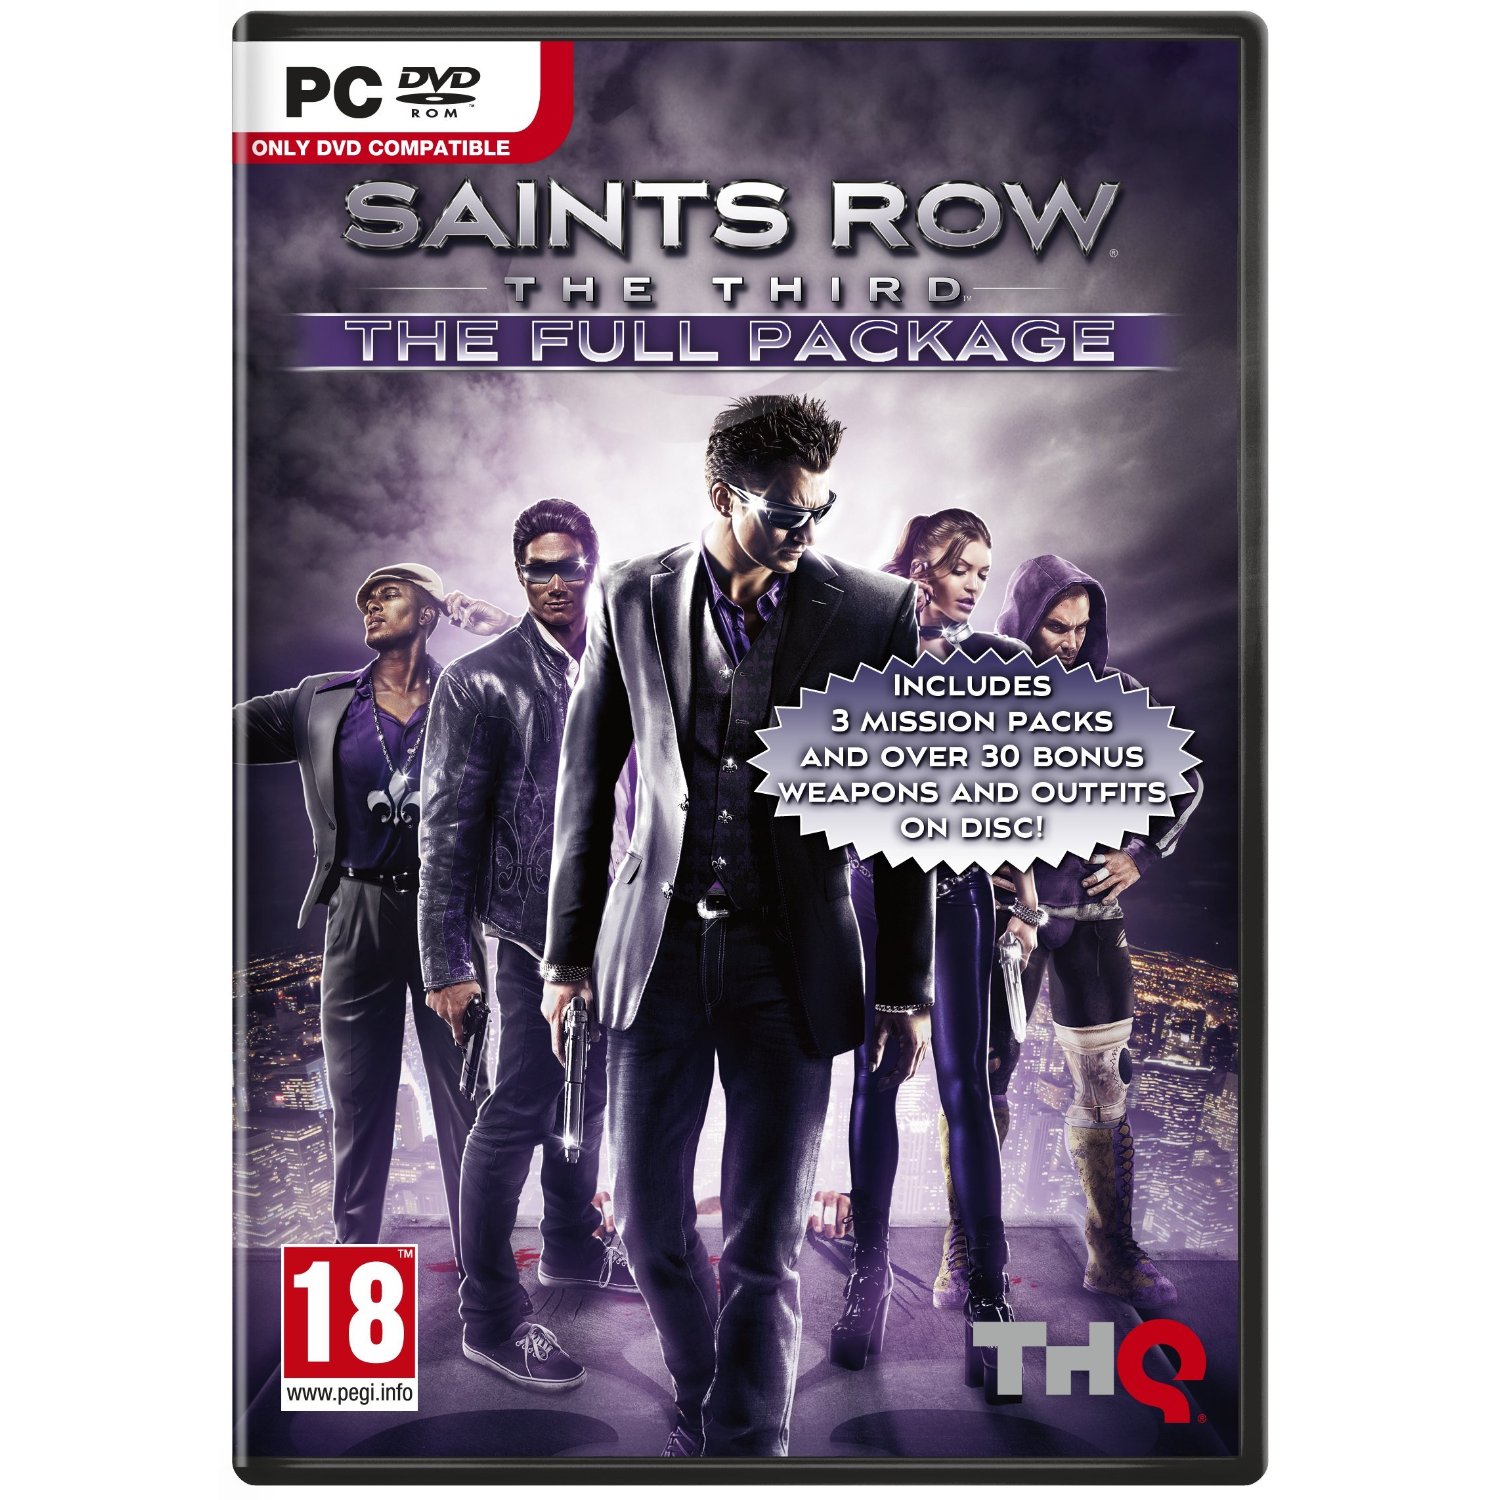 Saints Row The Third - The Full Pack (Steam Gift | ROW)